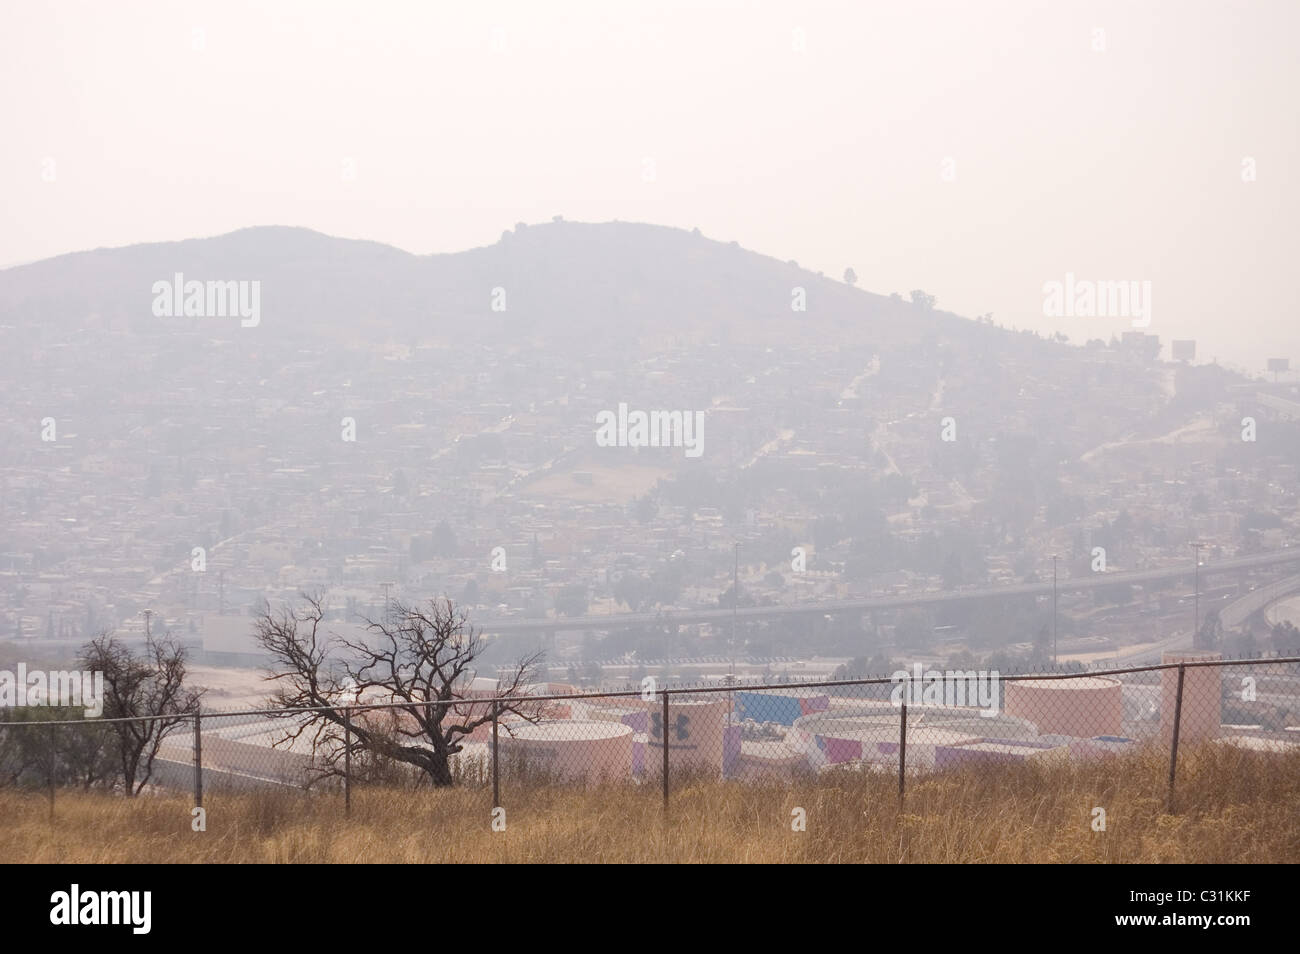 Hill full of houses and surrounded by very polluted air in central Mexico Stock Photo